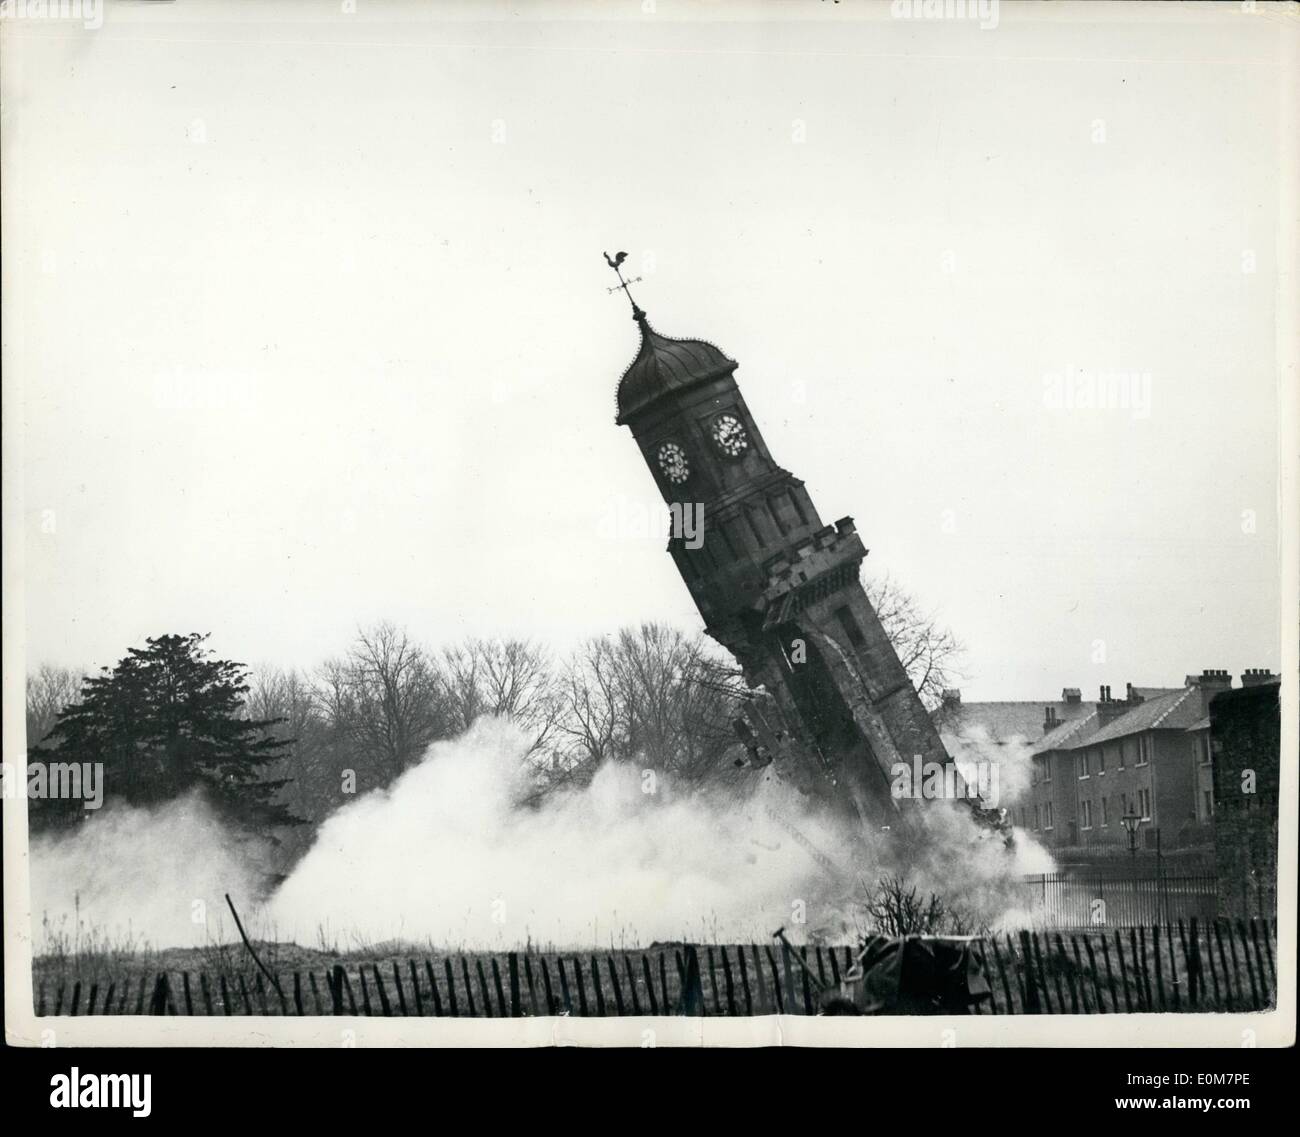 Jan. 01, 1954 - Gelignite Used To Destroy Ancient Steeple In Hamilton - Scotland: About 1,000 people, including many school children watched the destruction of the Old Tolbooth Steeple, in Muir Street, Hamilton, Scotland recently - with the aid of gelignite charges...The steeple bell had tolled out the hours for 312 years but the foundations of the steeple were eaten away and it menaced a nearby housing scheme. Photo Shows: The gelignite charges go off and down topples the ancient steeples. Stock Photo